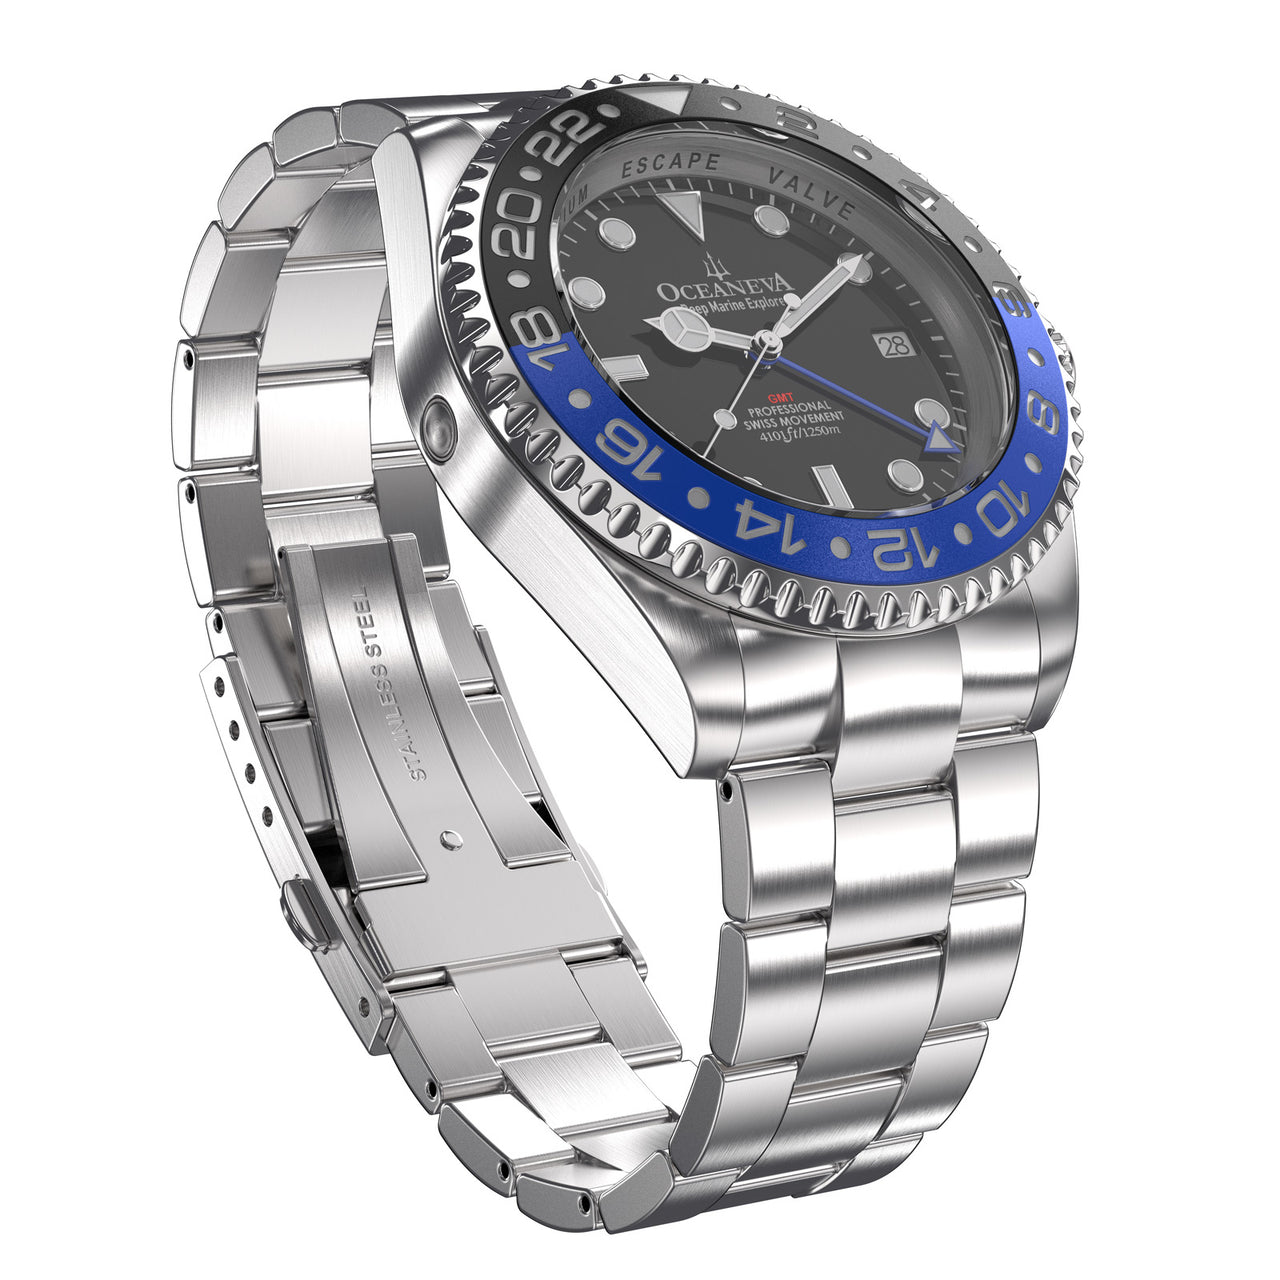 Oceaneva 1250M GMT Dive Watch Blue And Black Front Picture Slight Right Slant View